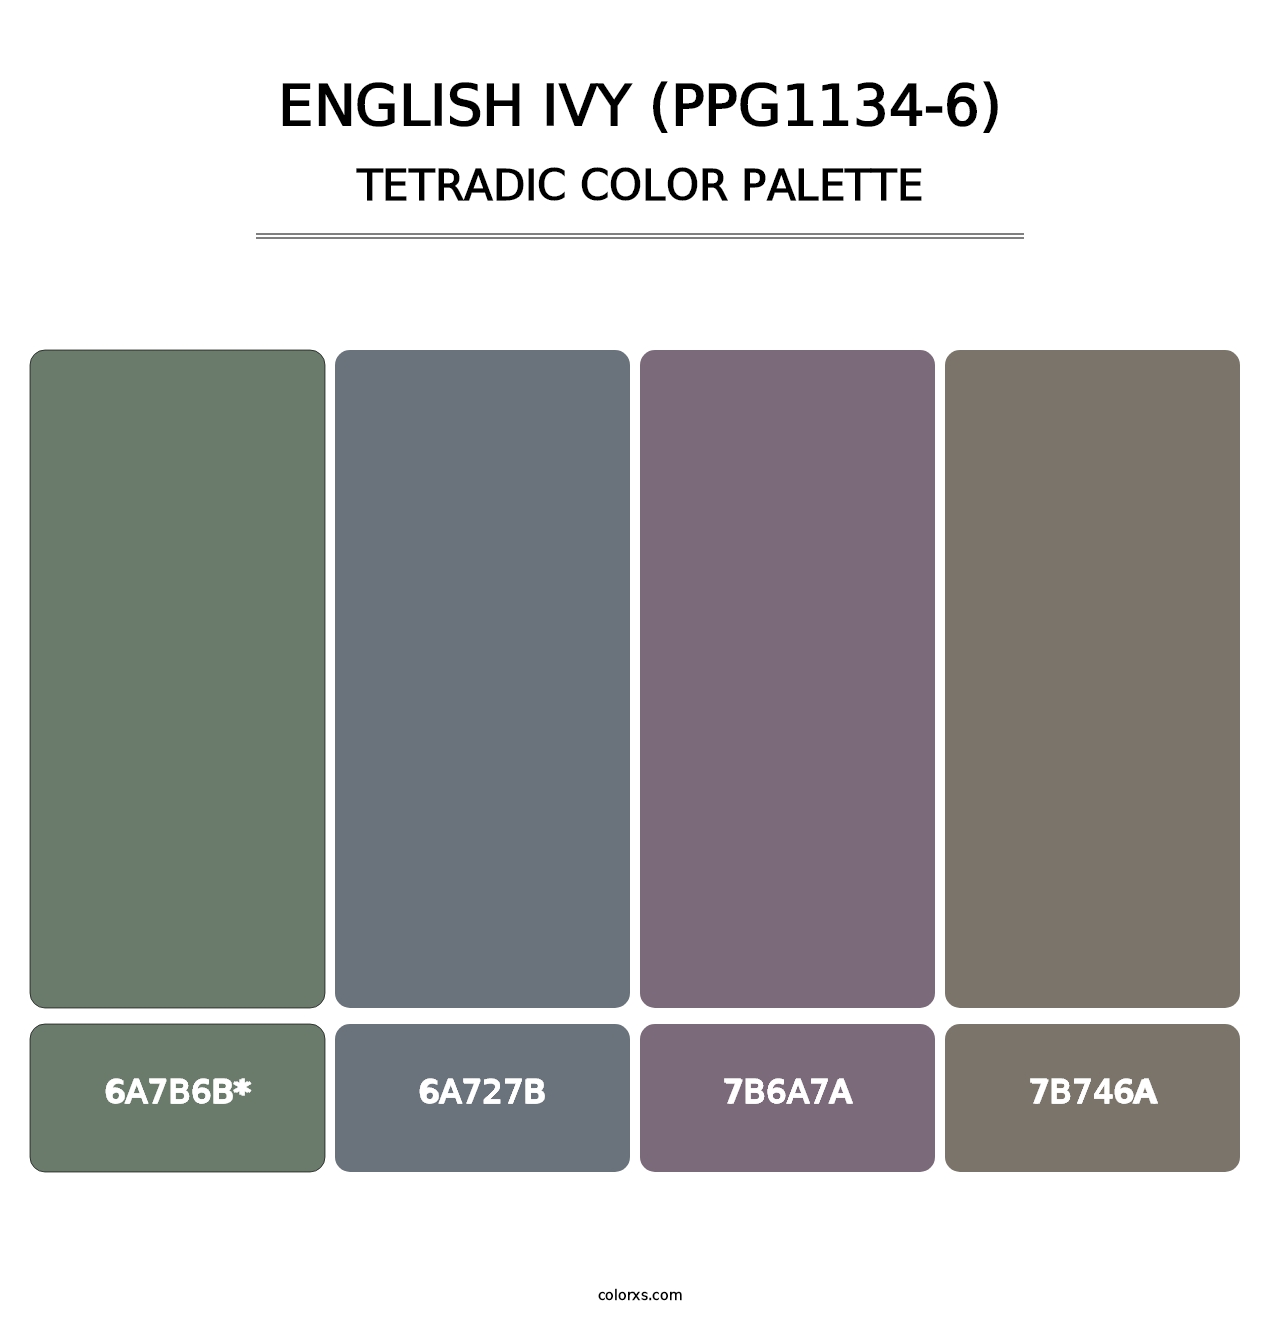 English Ivy (PPG1134-6) - Tetradic Color Palette